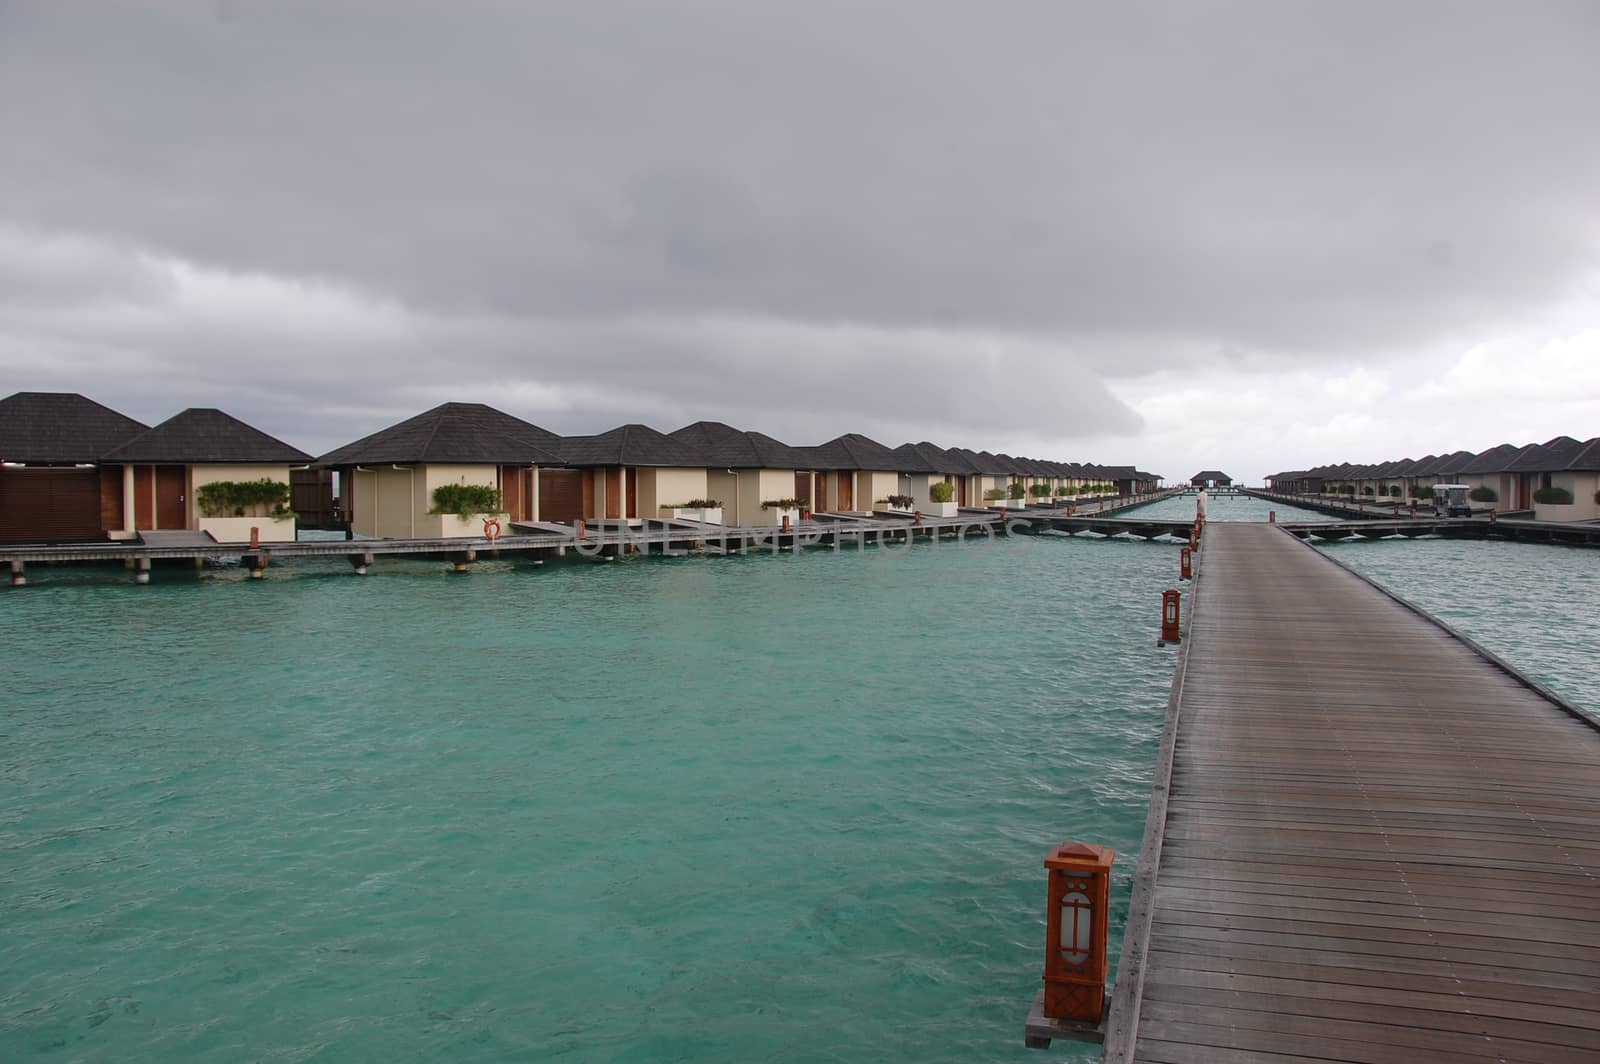 Timber pier and bungalow at Paradise Island Resort Maldives by danemo